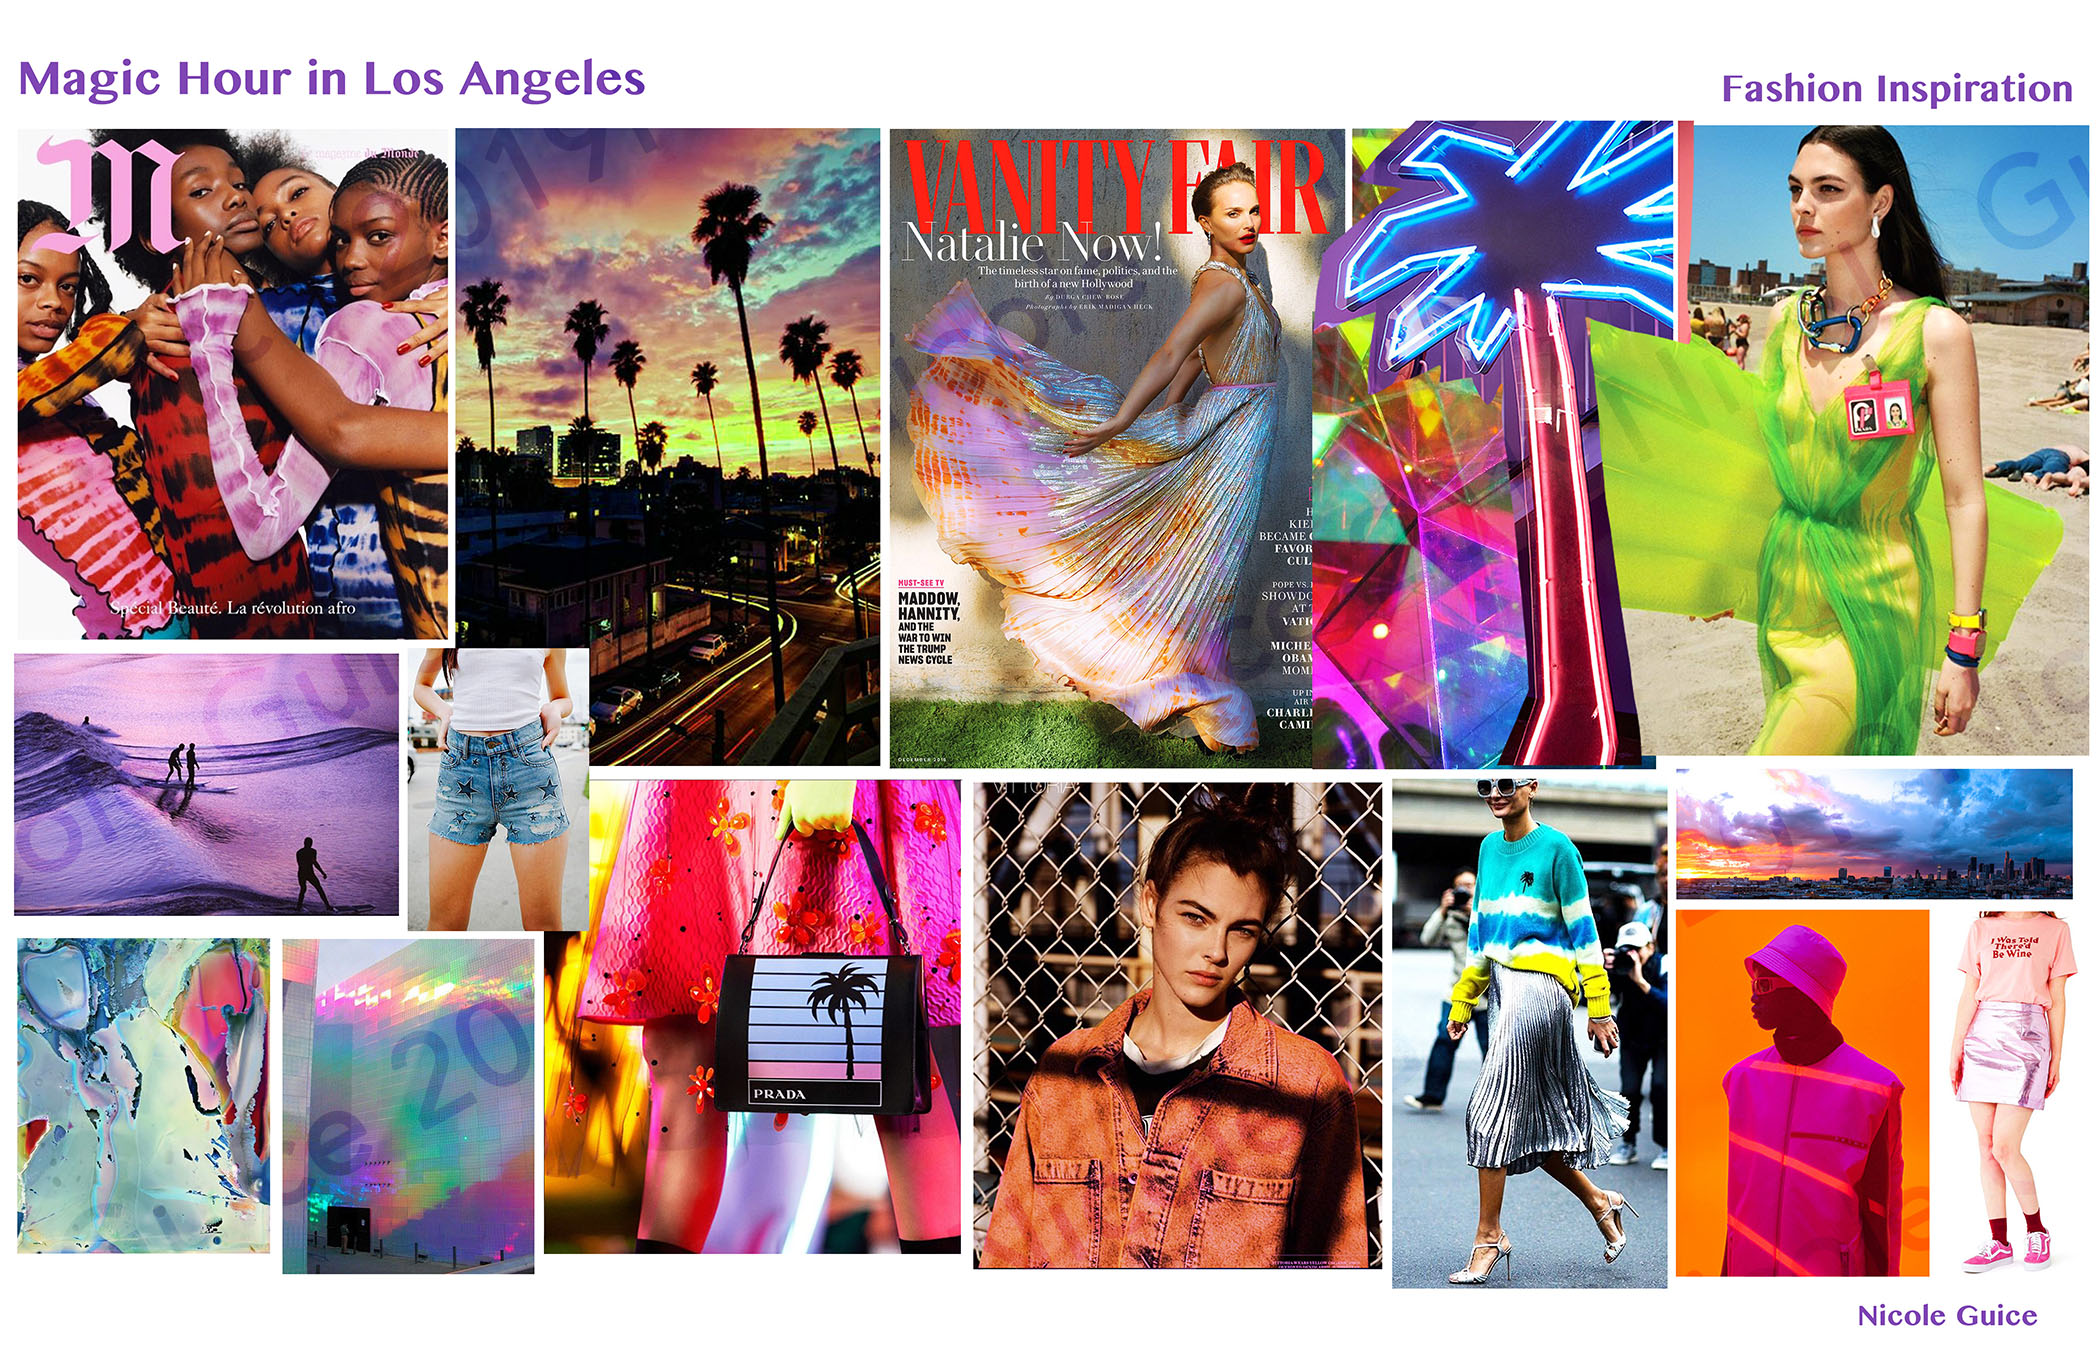 MAgic hour collection_Fashion Inspiration_Nicole Guice_ website.jpg